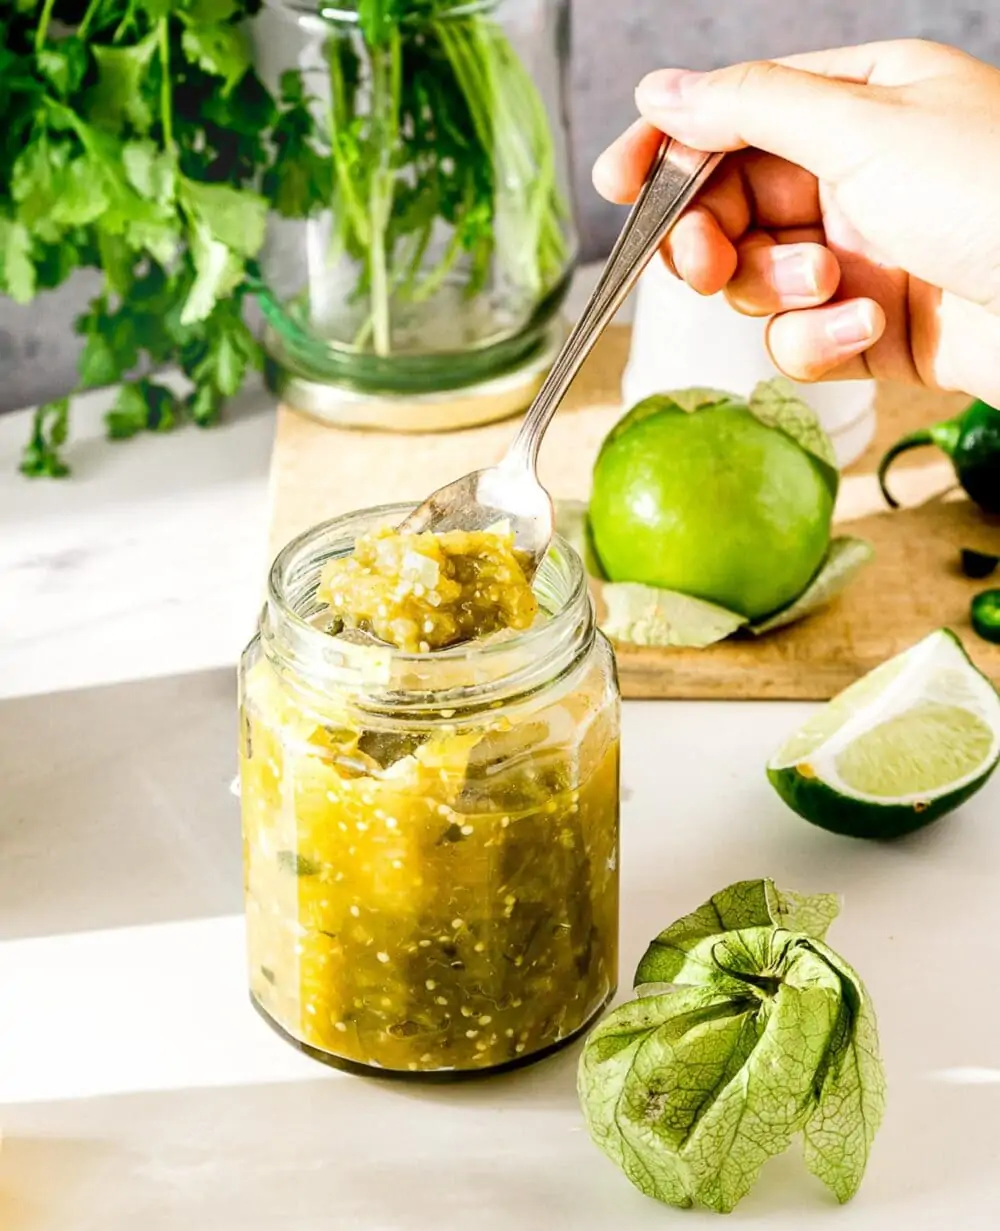 spooning tomatillo salsa verde out of a glass jar.